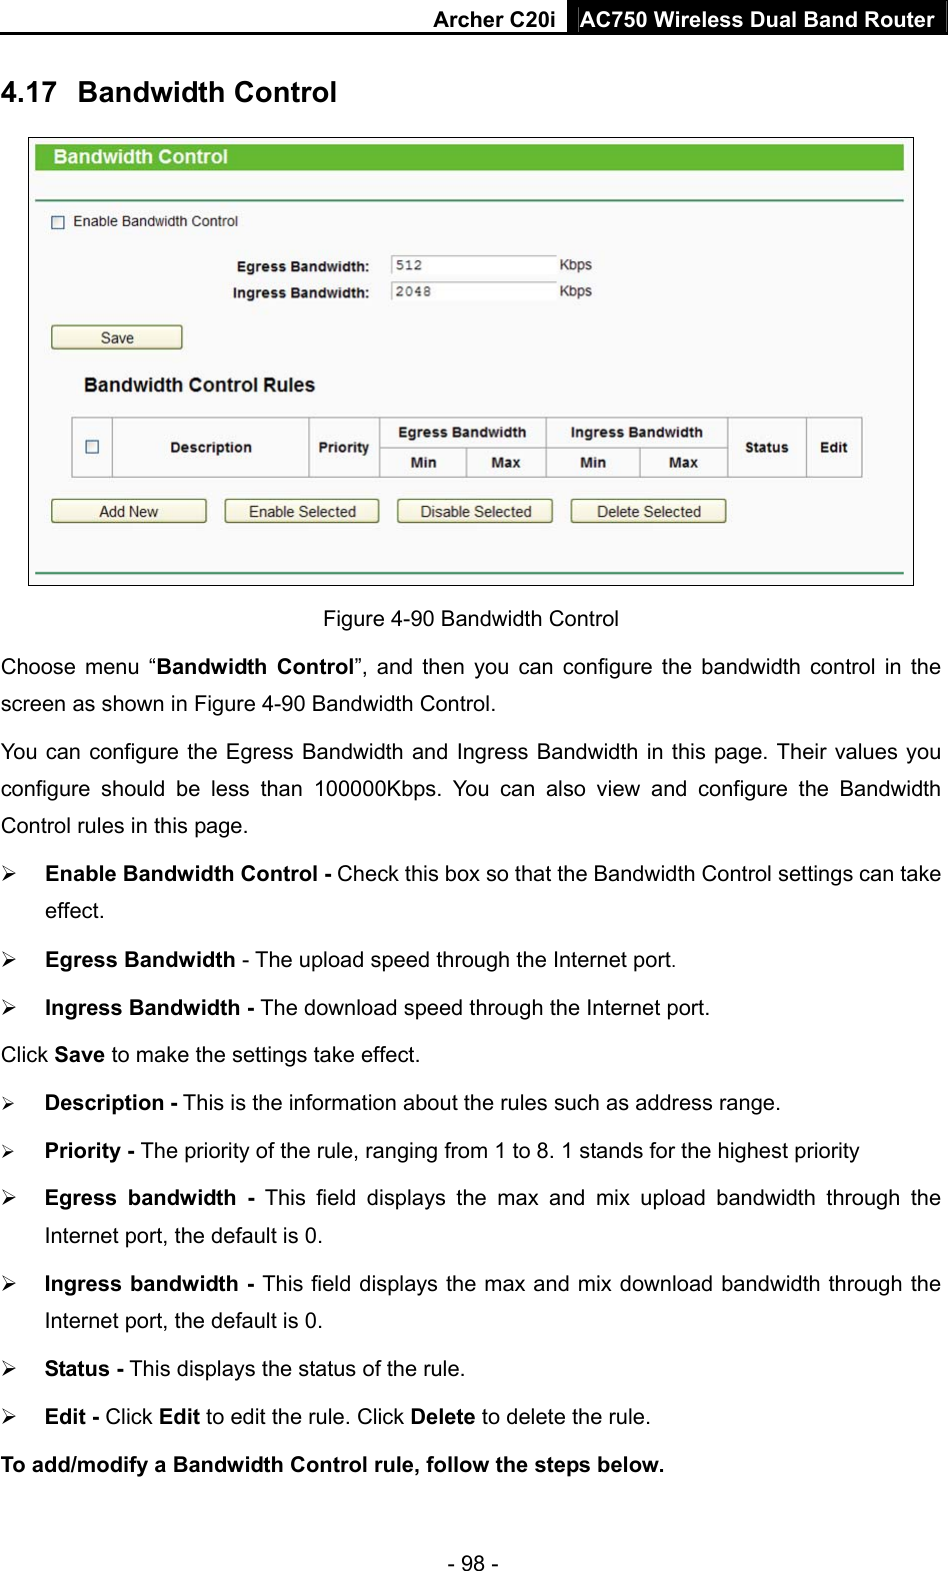 Archer C20i AC750 Wireless Dual Band Router - 98 - 4.17  Bandwidth Control  Figure 4-90 Bandwidth Control   Choose menu “Bandwidth Control”, and then you can configure the bandwidth control in the screen as shown in Figure 4-90 Bandwidth Control.  You can configure the Egress Bandwidth and Ingress Bandwidth in this page. Their values you configure should be less than 100000Kbps. You can also view and configure the Bandwidth Control rules in this page. ¾ Enable Bandwidth Control - Check this box so that the Bandwidth Control settings can take effect. ¾ Egress Bandwidth - The upload speed through the Internet port. ¾ Ingress Bandwidth - The download speed through the Internet port. Click Save to make the settings take effect. ¾ Description - This is the information about the rules such as address range. ¾ Priority - The priority of the rule, ranging from 1 to 8. 1 stands for the highest priority ¾ Egress bandwidth - This field displays the max and mix upload bandwidth through the Internet port, the default is 0. ¾ Ingress bandwidth - This field displays the max and mix download bandwidth through the Internet port, the default is 0. ¾ Status - This displays the status of the rule. ¾ Edit - Click Edit to edit the rule. Click Delete to delete the rule. To add/modify a Bandwidth Control rule, follow the steps below. 